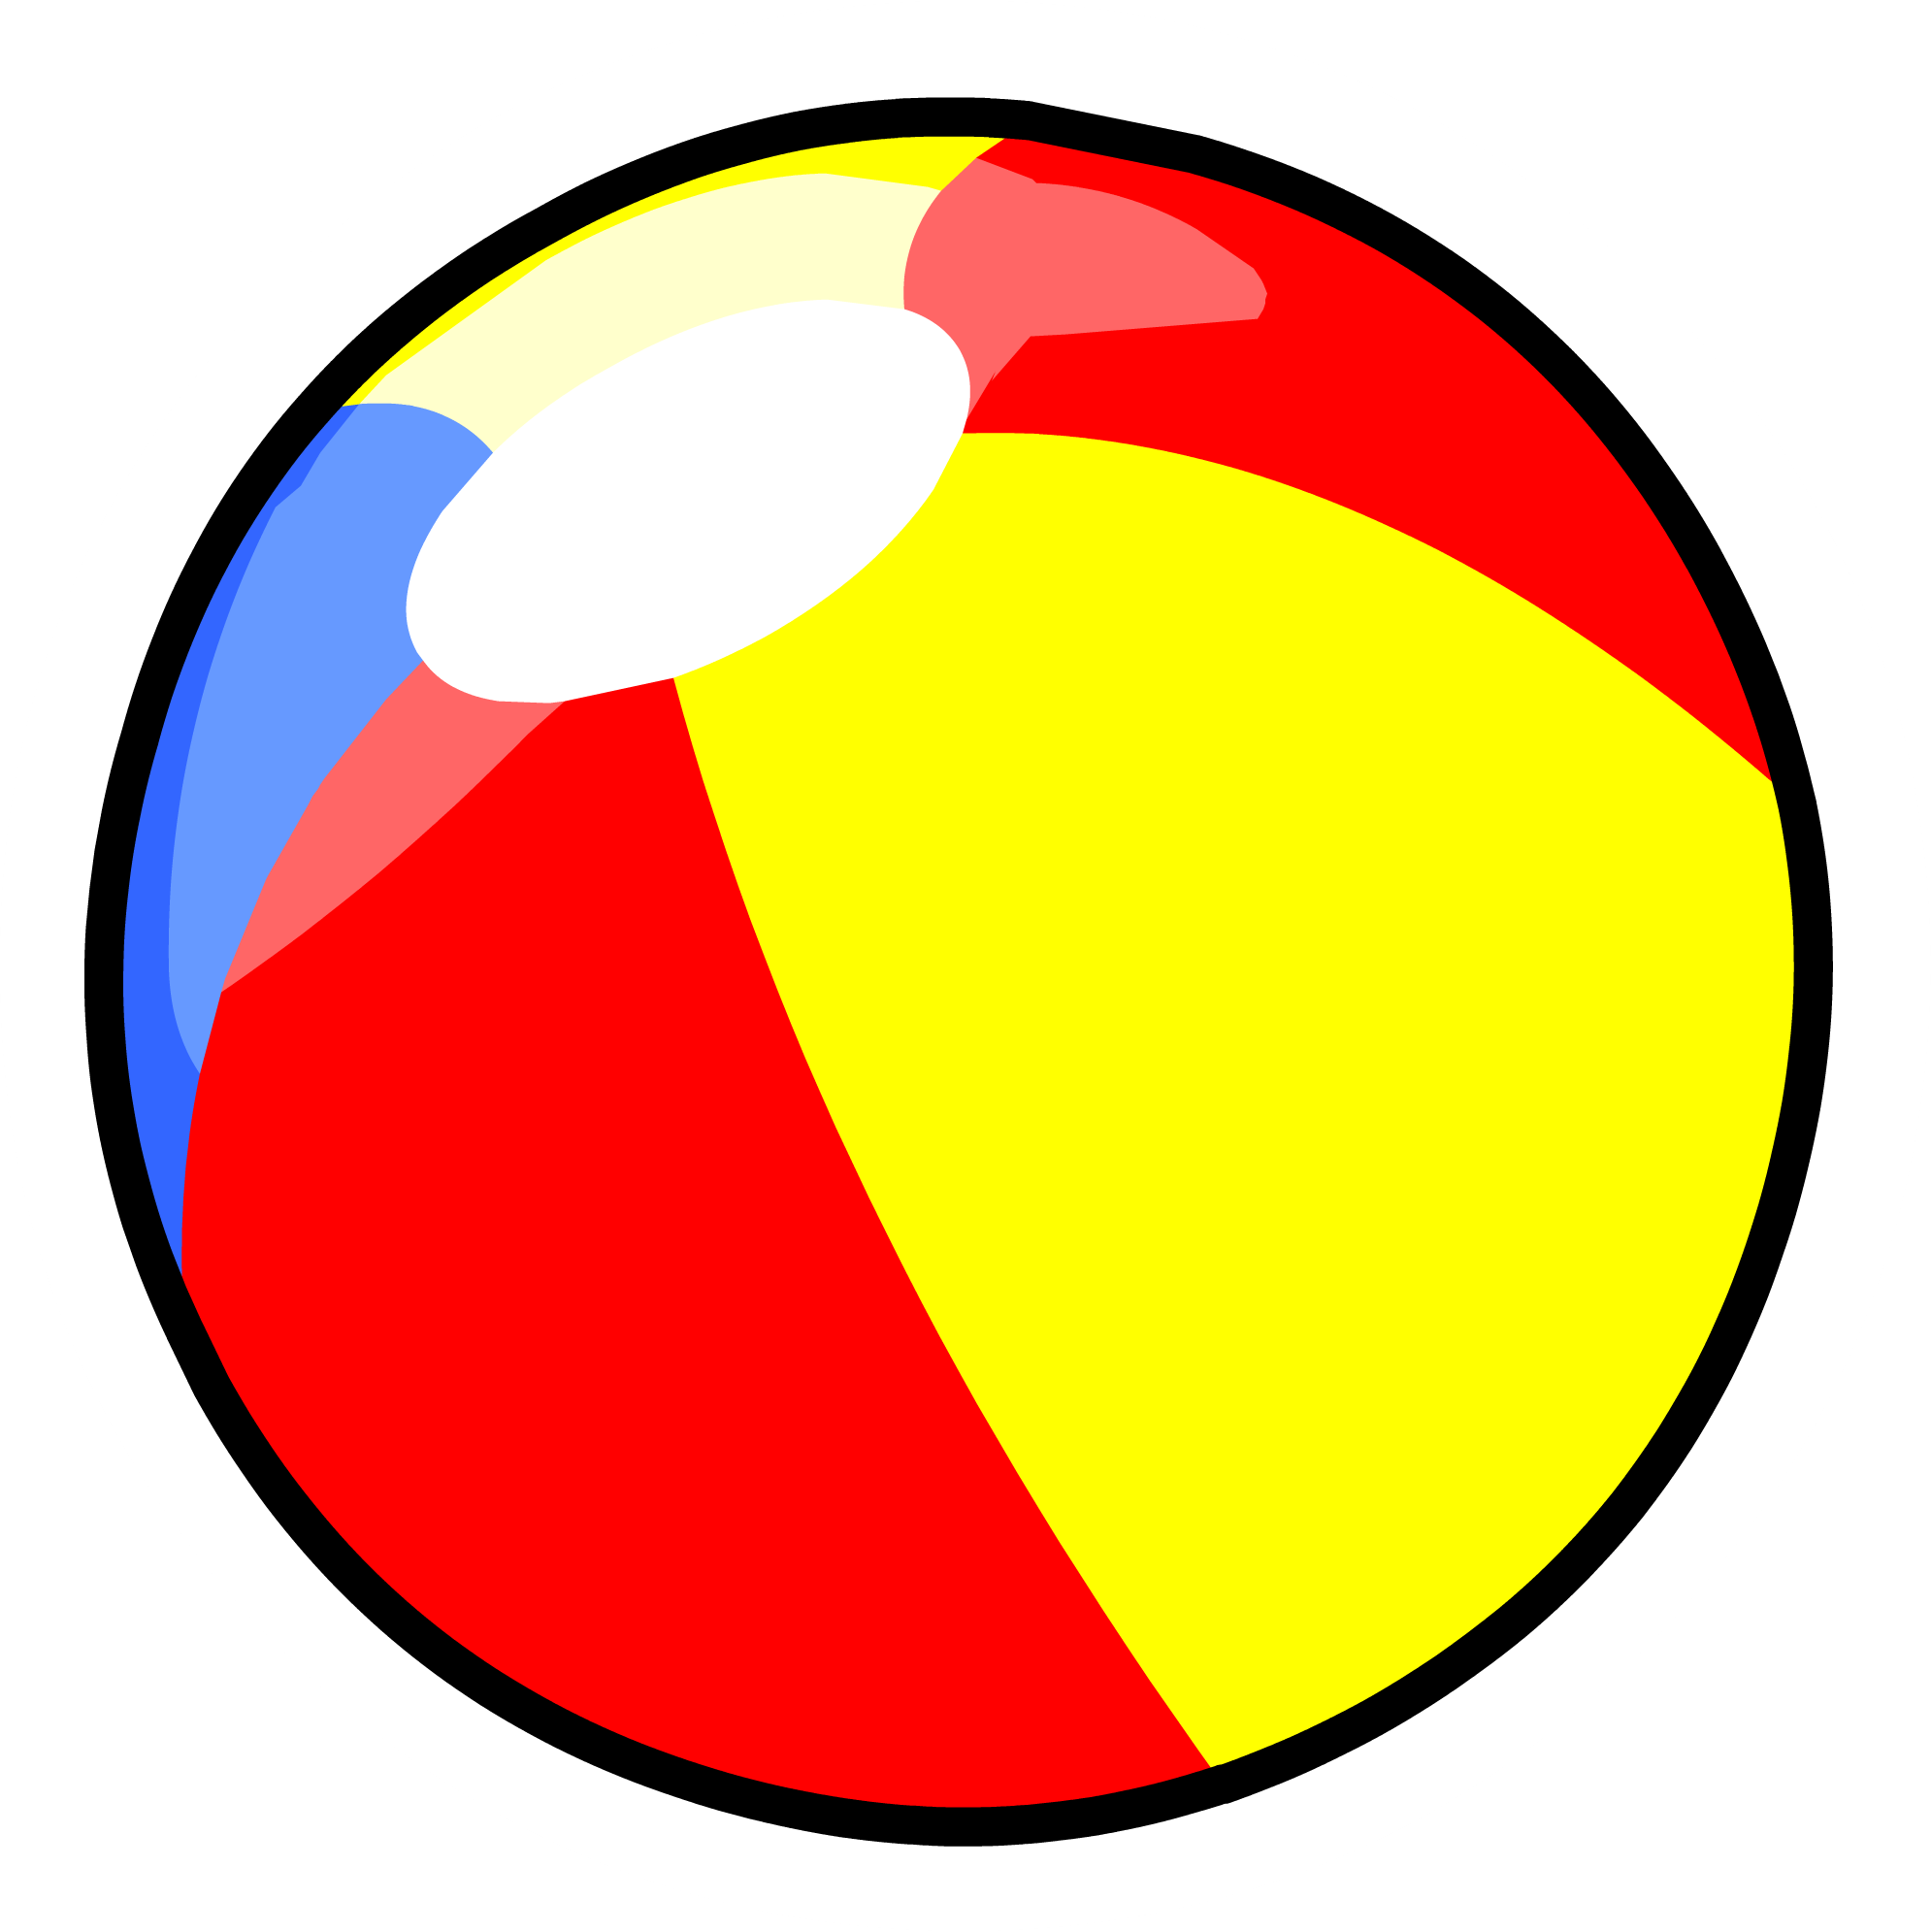 Image - Beach Ball Pin.PNG | Club Penguin Wiki | Fandom powered by ...